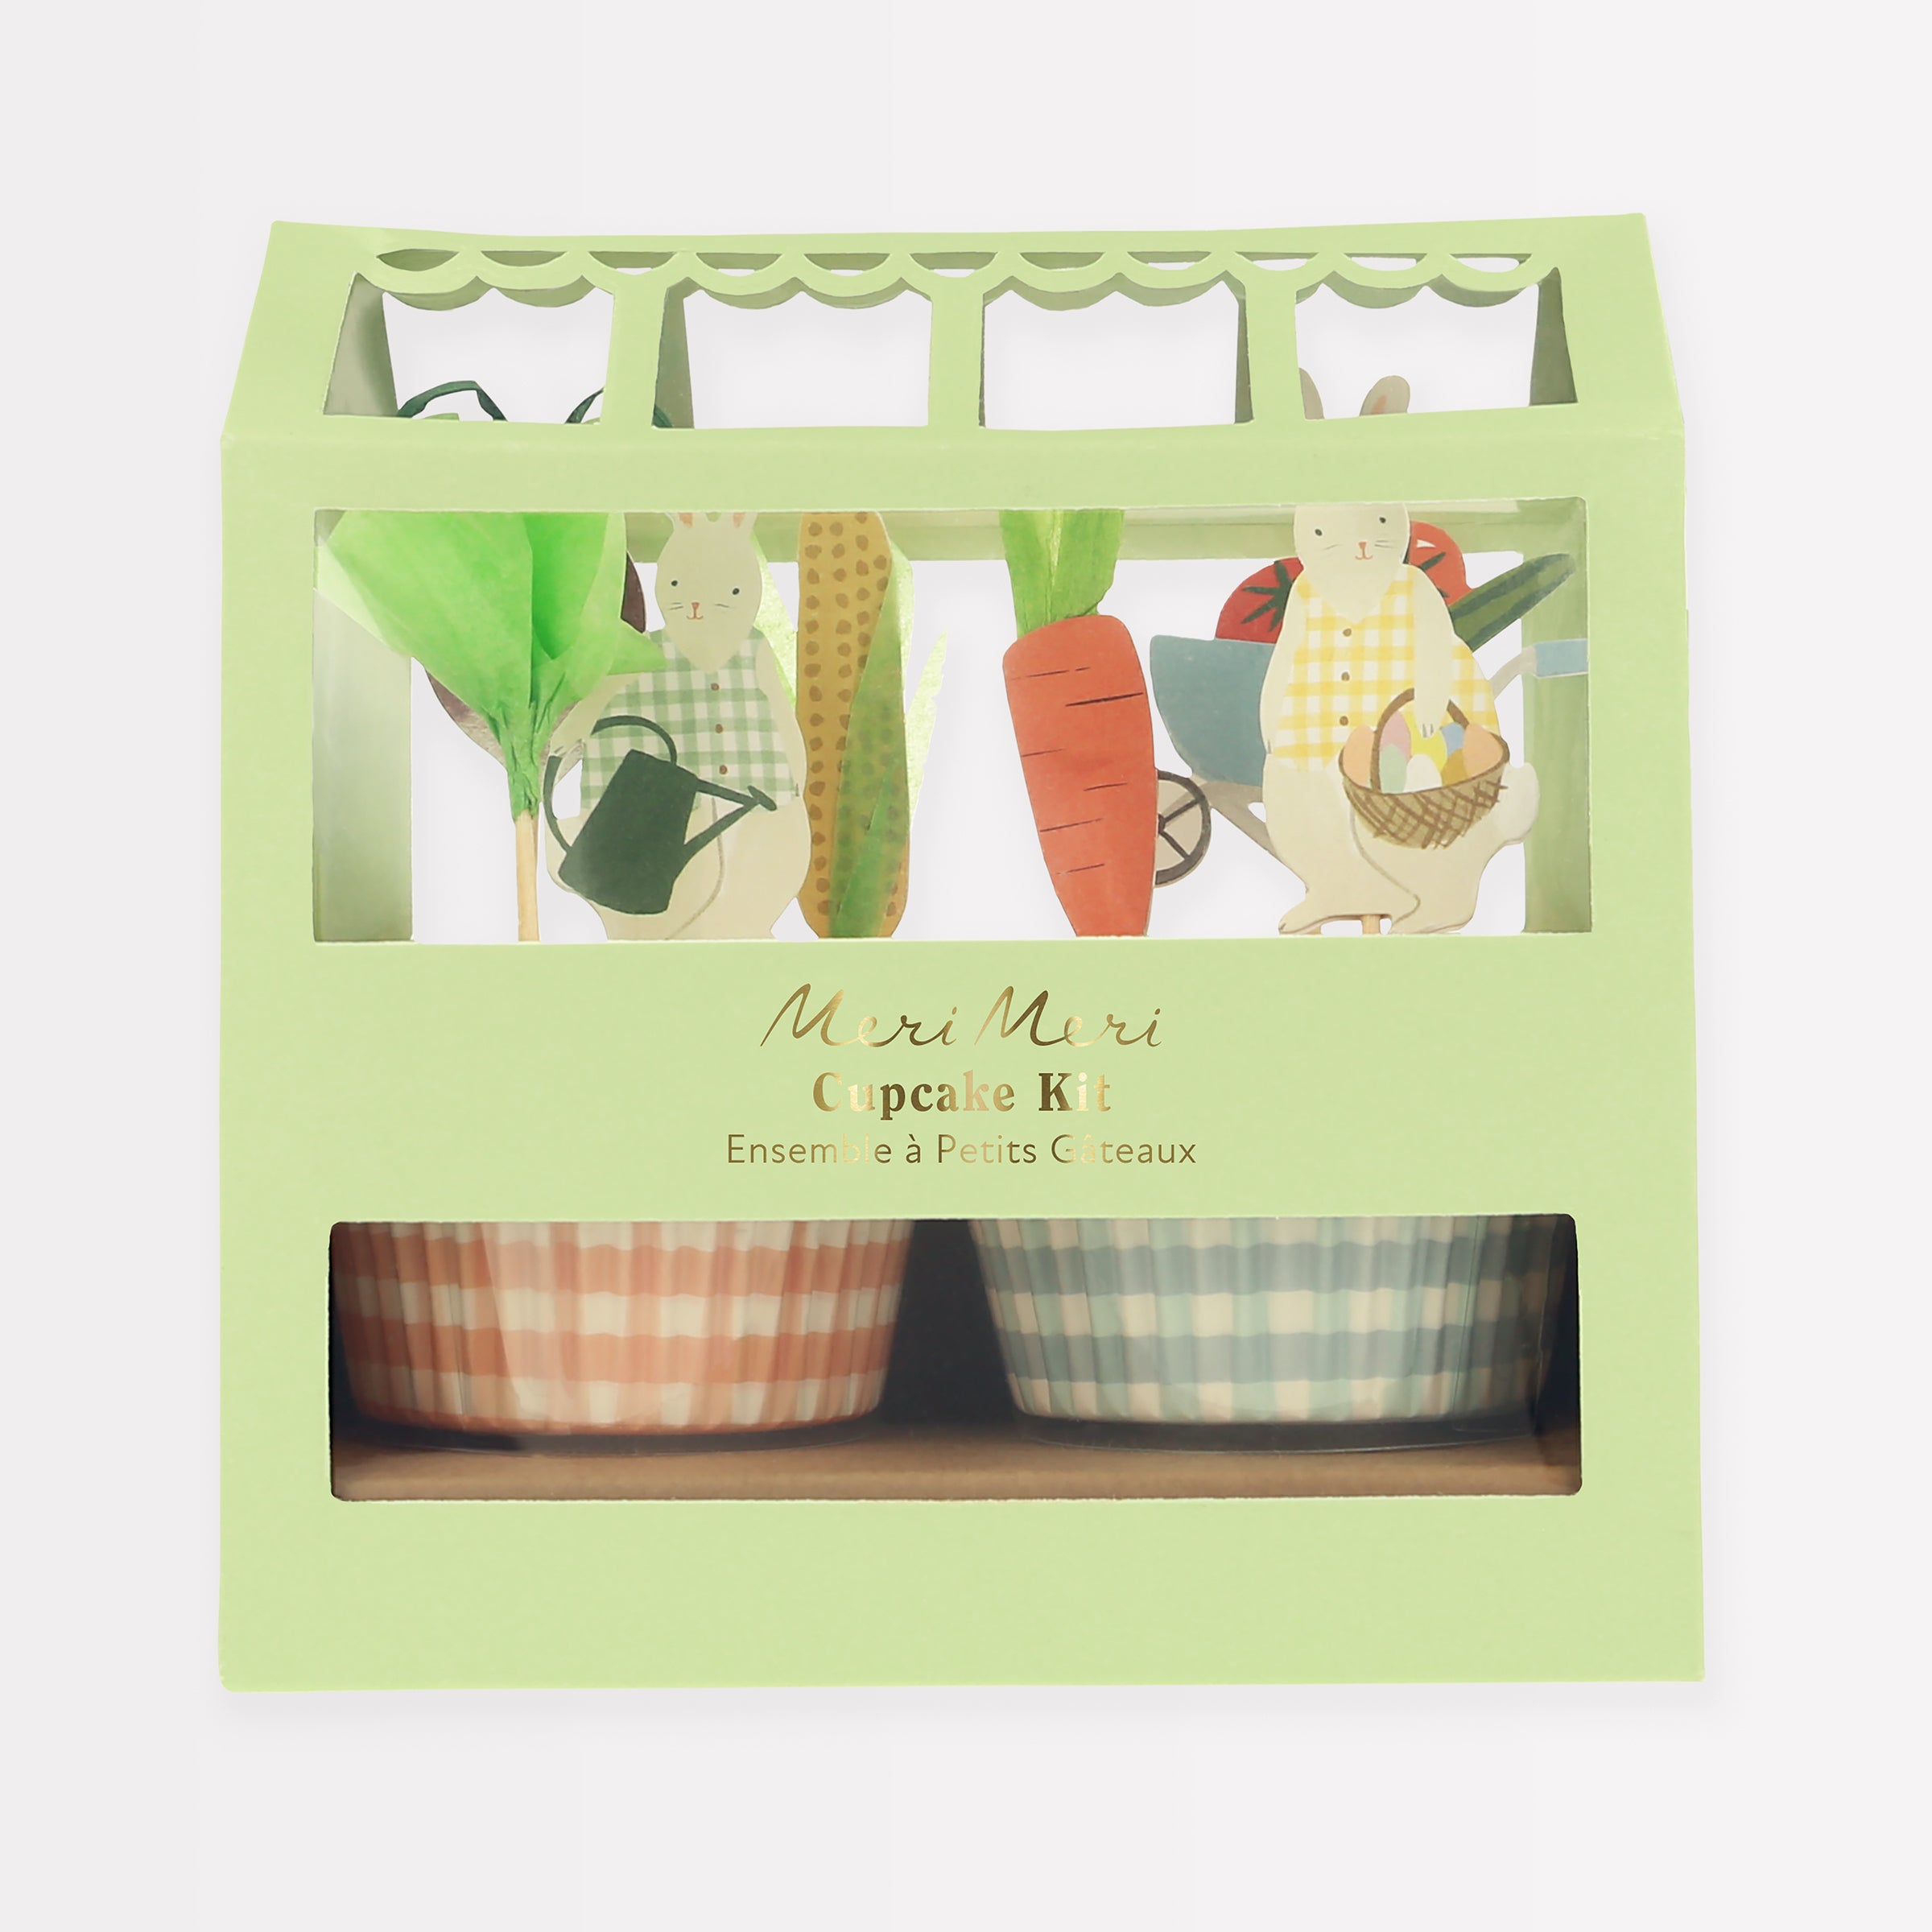 Our Easter cupcake kit,  packaged in a box that looks like a greenhouse, make a fabulous Easter gift for kids who love to bake.